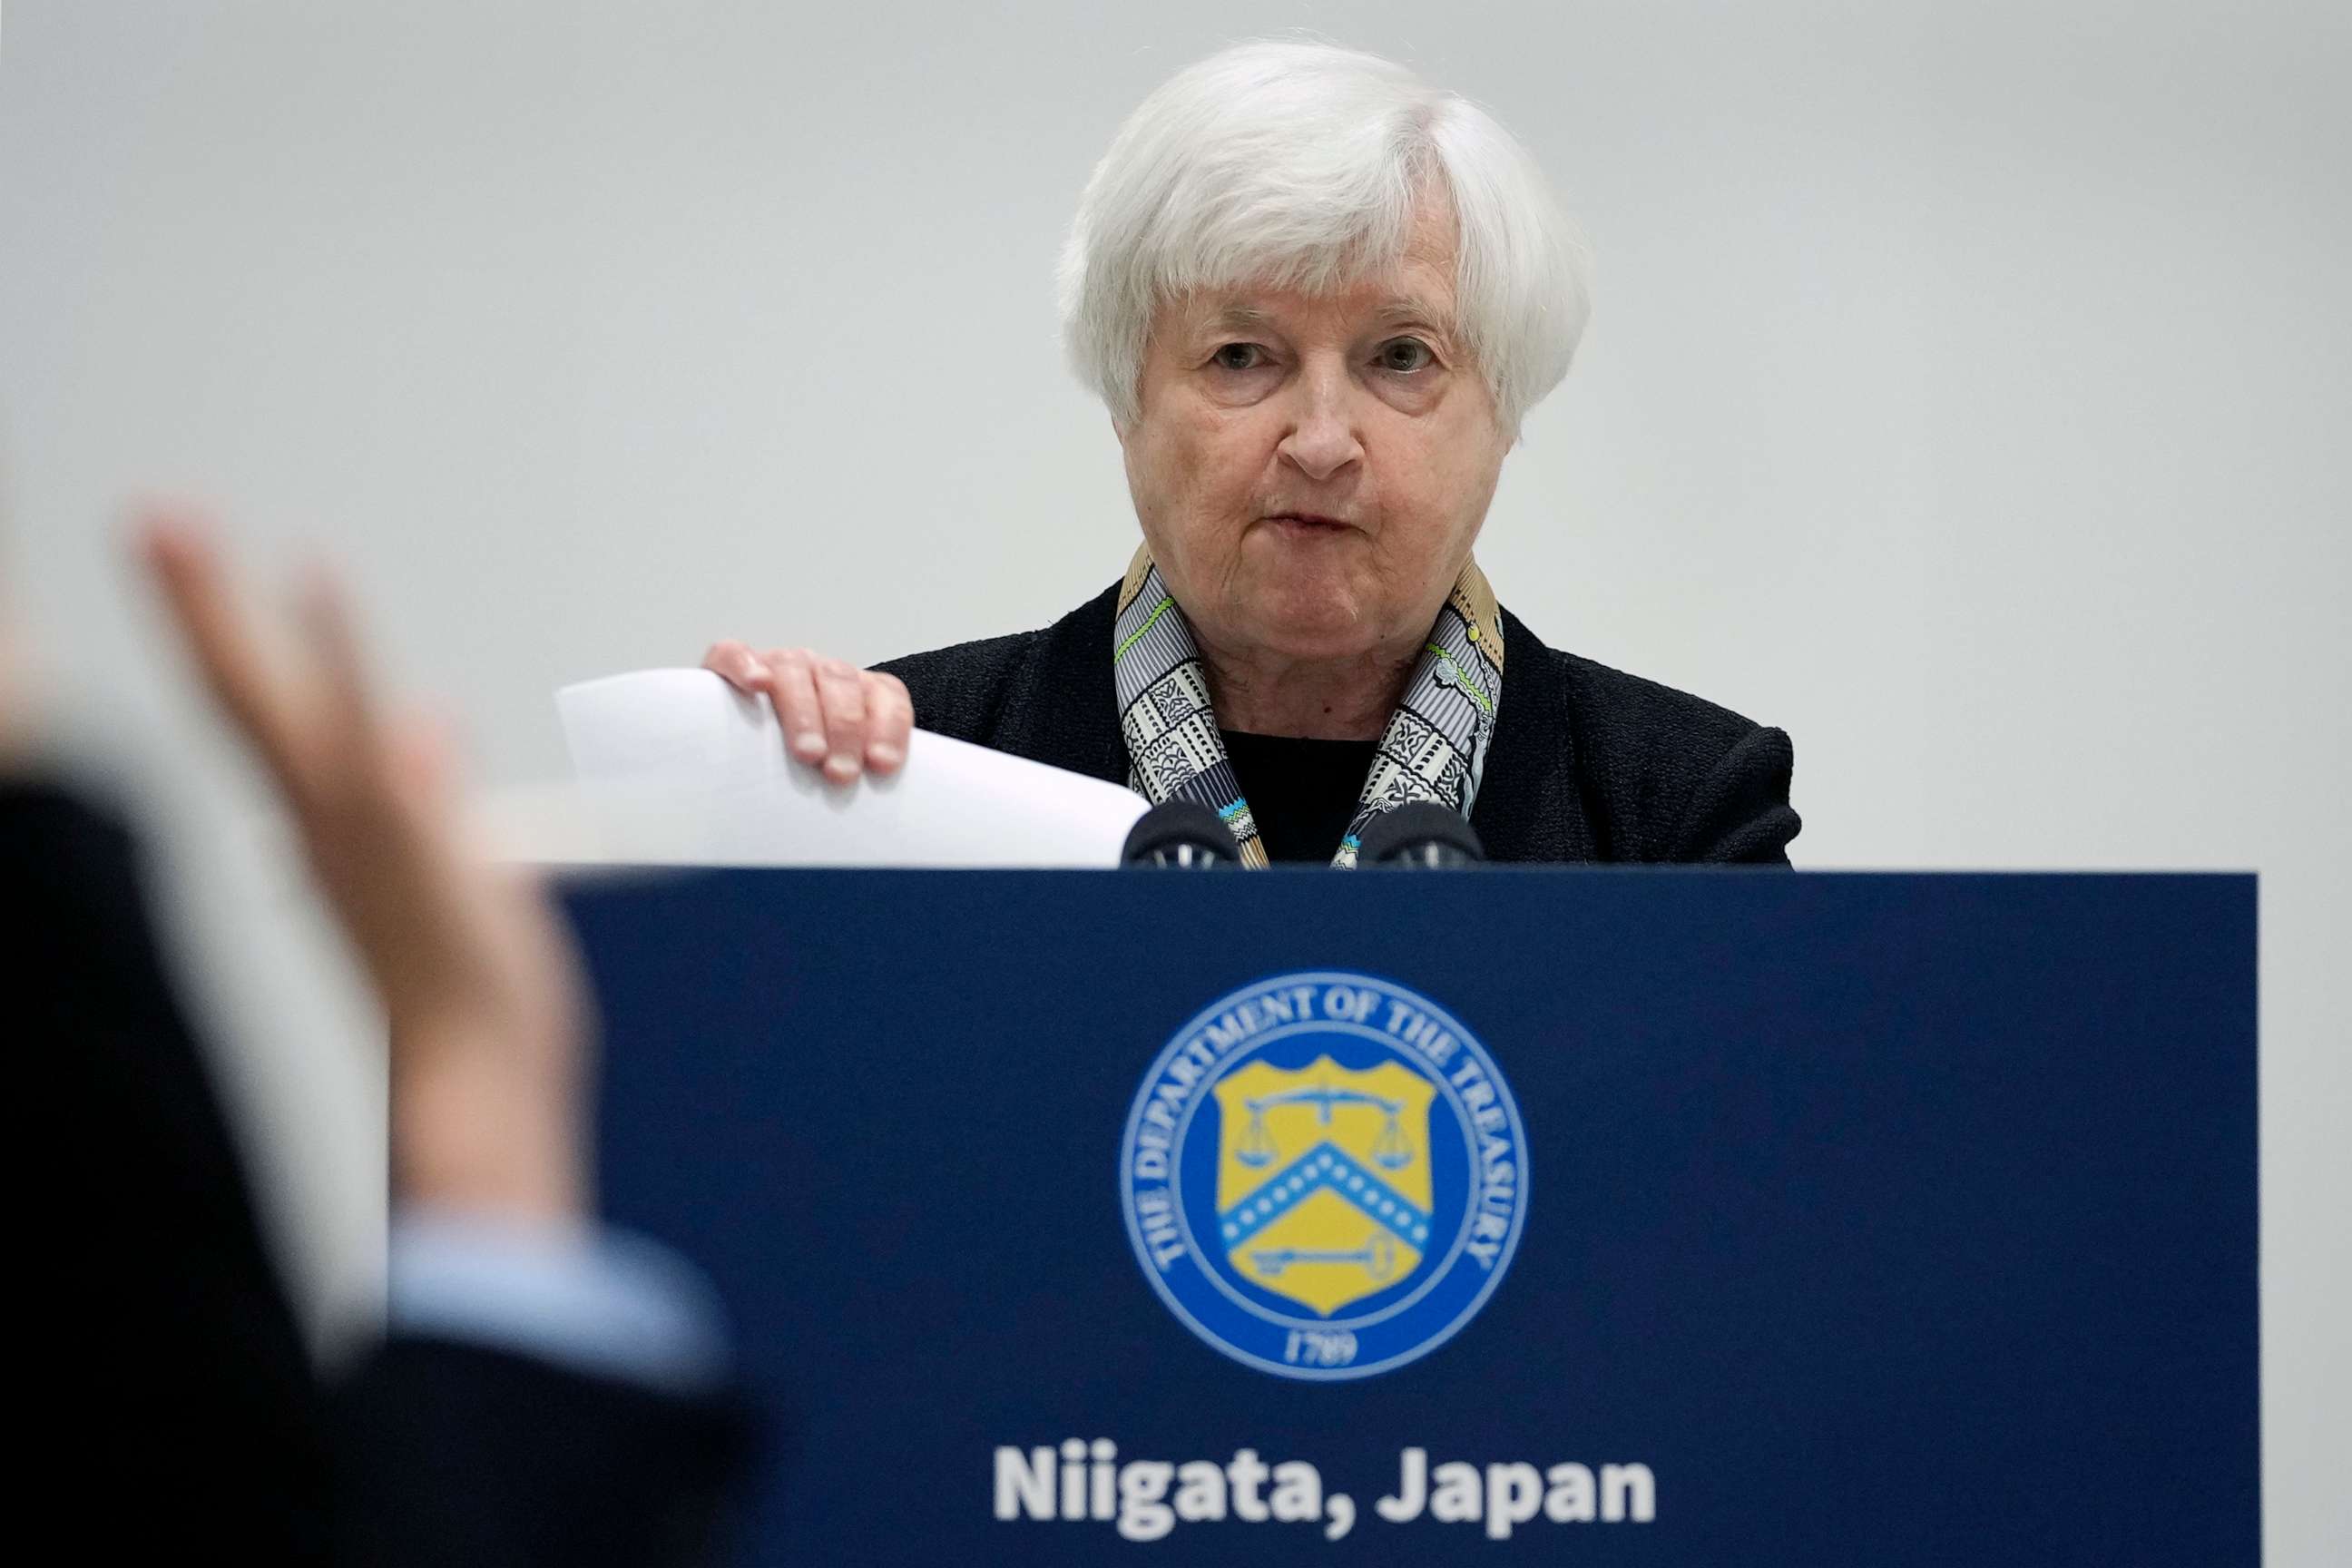 PHOTO: Treasury Secretary Janet Yellen takes questions during a press conference in Niigata, Japan, May 11, 2023.